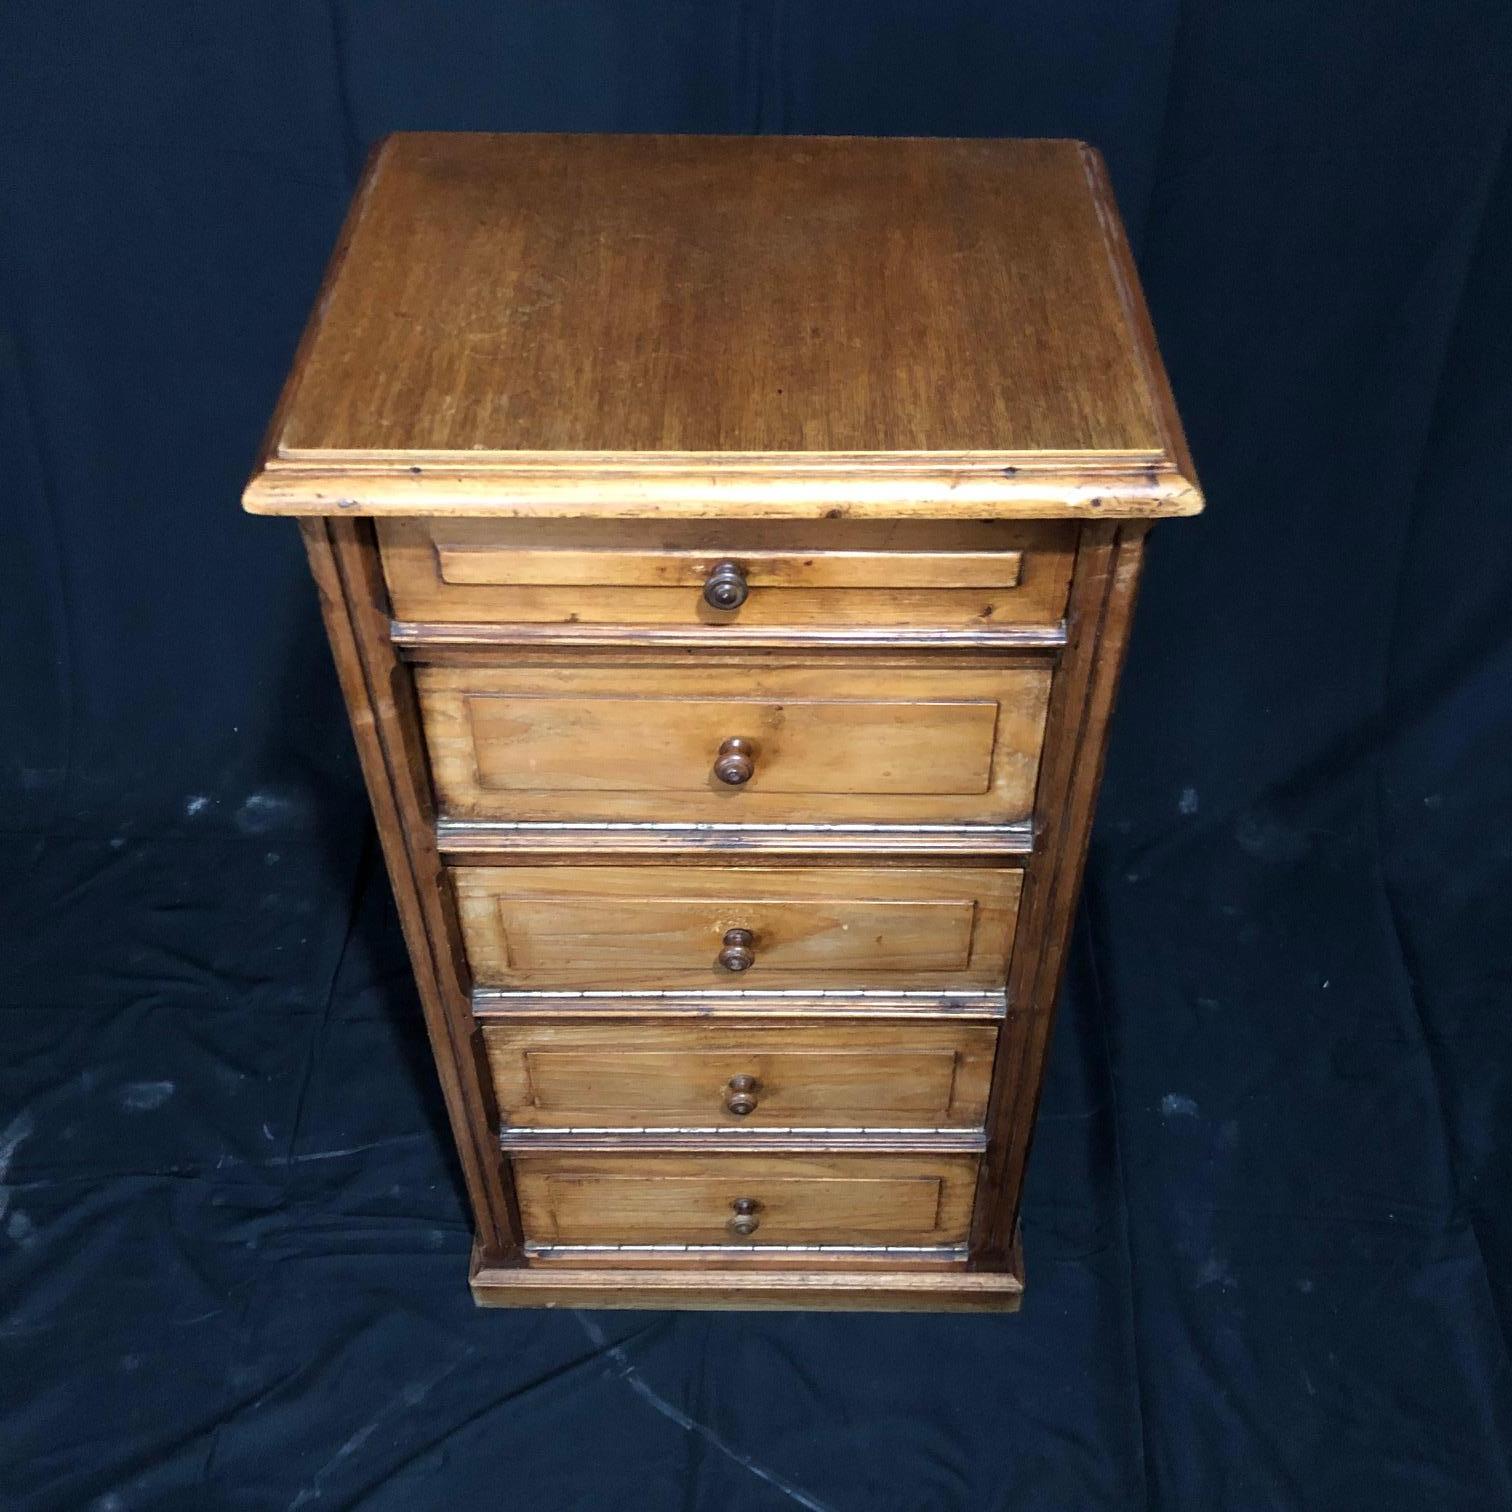 An innovative French storage cabinet or chest from Normandy, France having lovely lines, a single drawer on top and four surprising pull open storage compartments underneath.
 #5197.